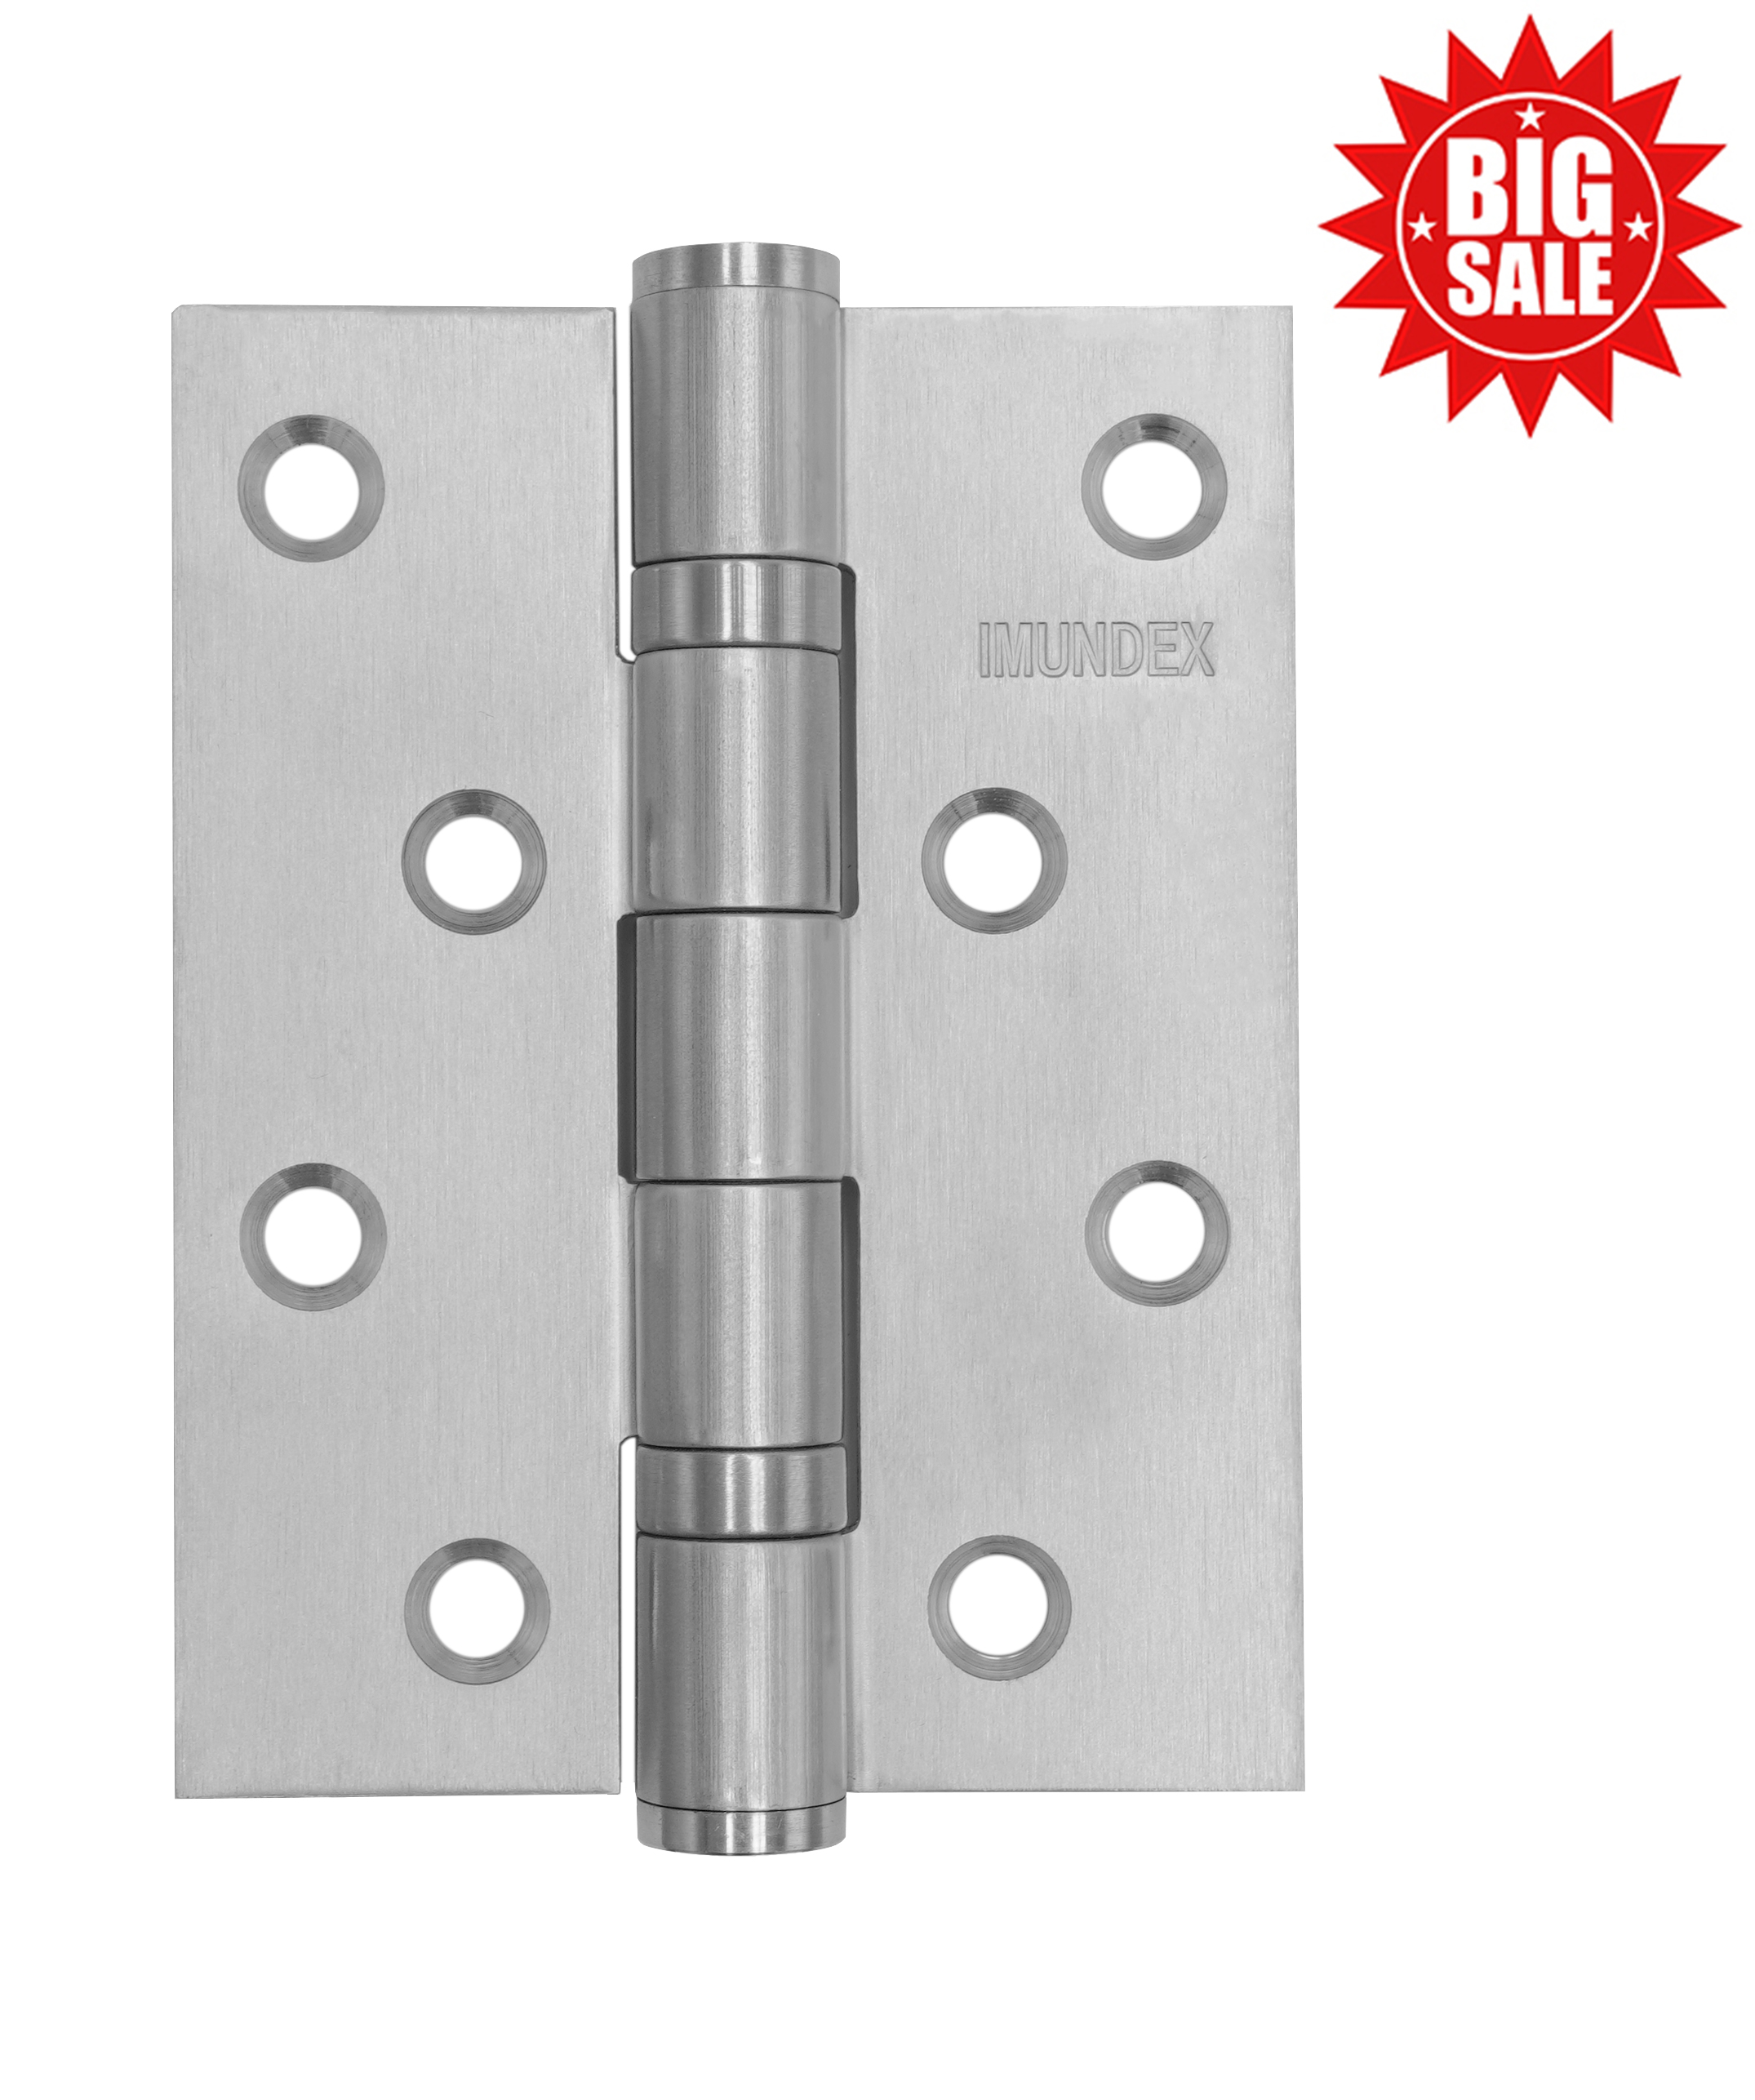 Ball bearing hinge with small size - 2BB - SS 304